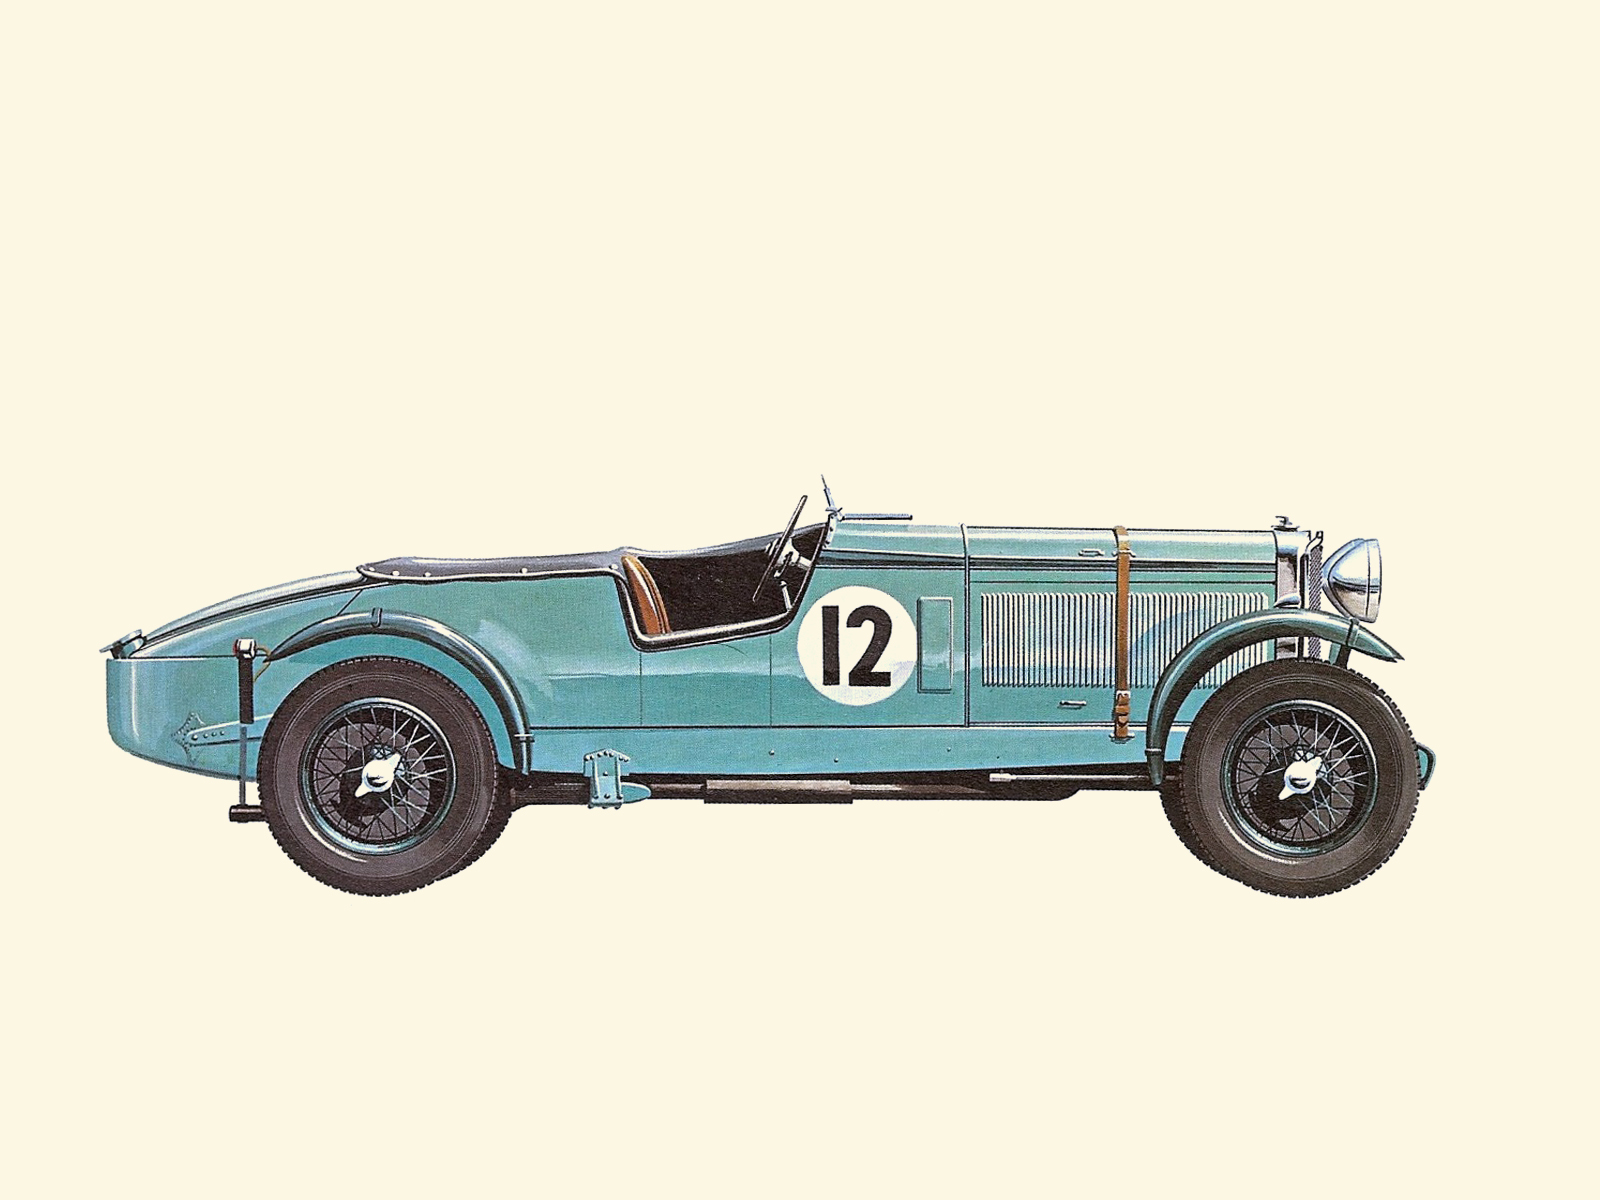 1931 Talbot-London '105' - Illustrated by Pierre Dumont